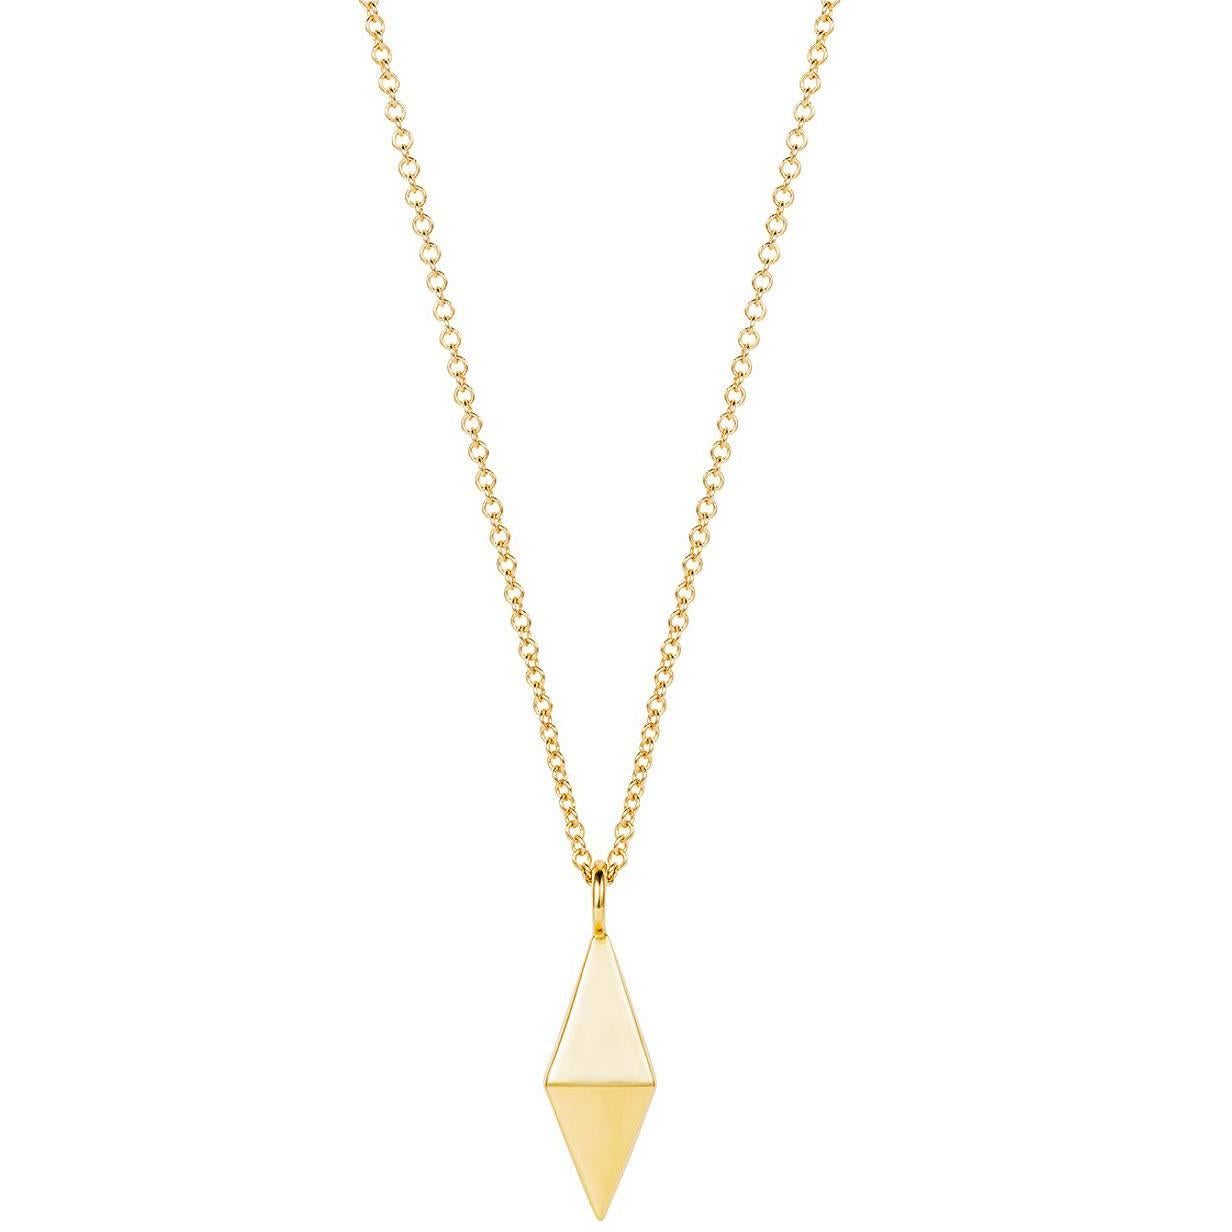 Geometric Double Pyramid Gold Necklace For Sale